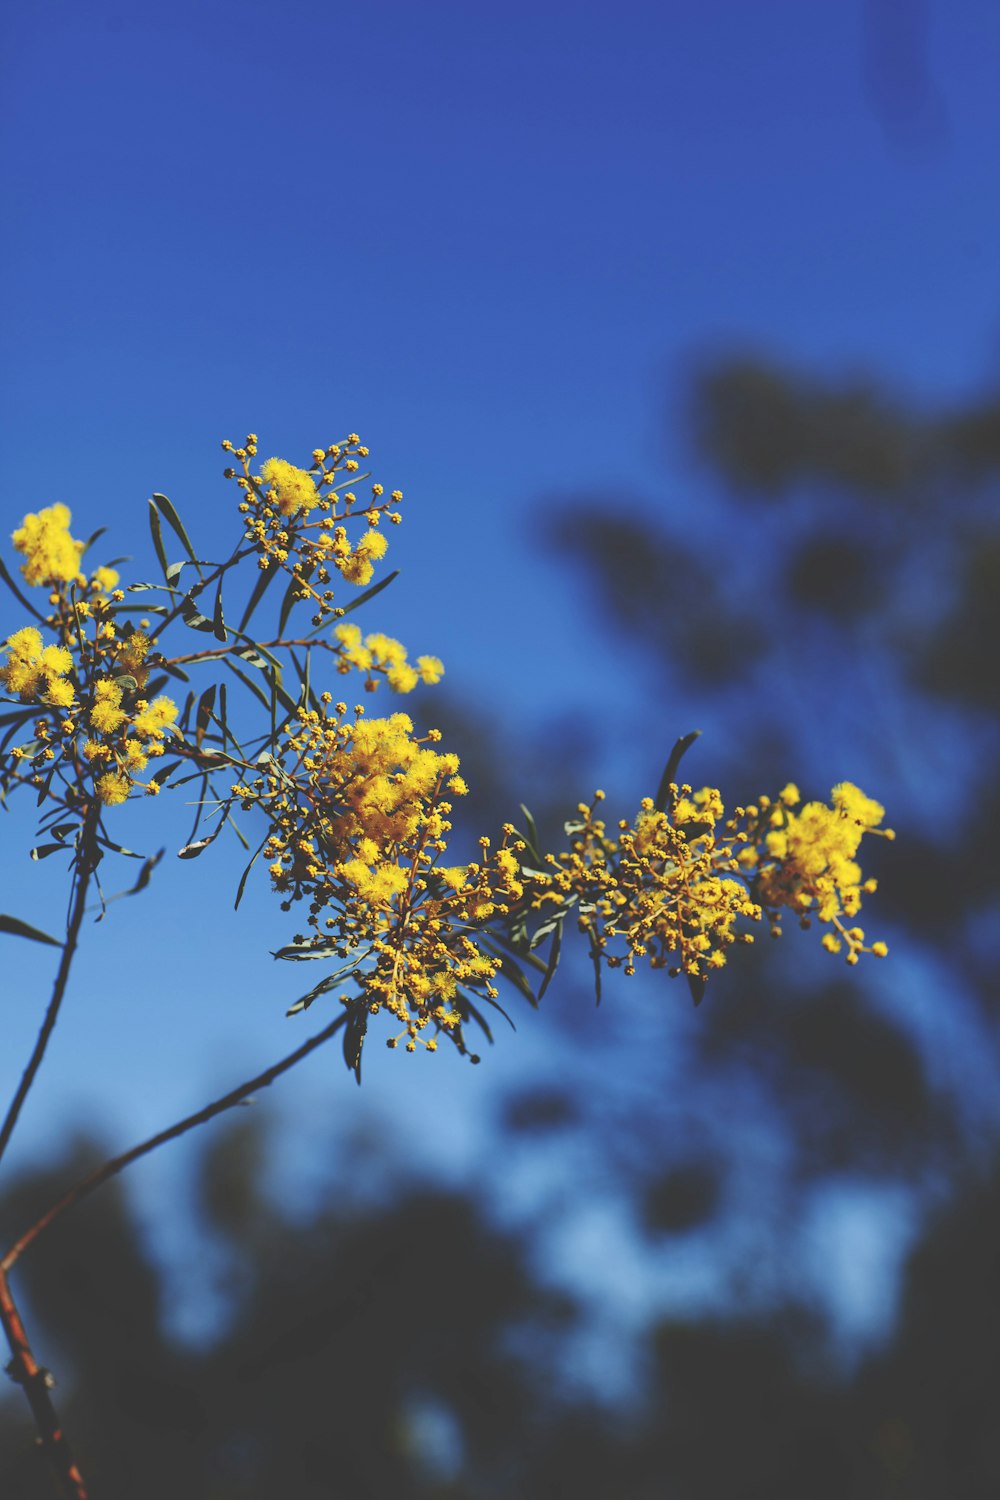 a plant with yellow flowers in front of a blue sky